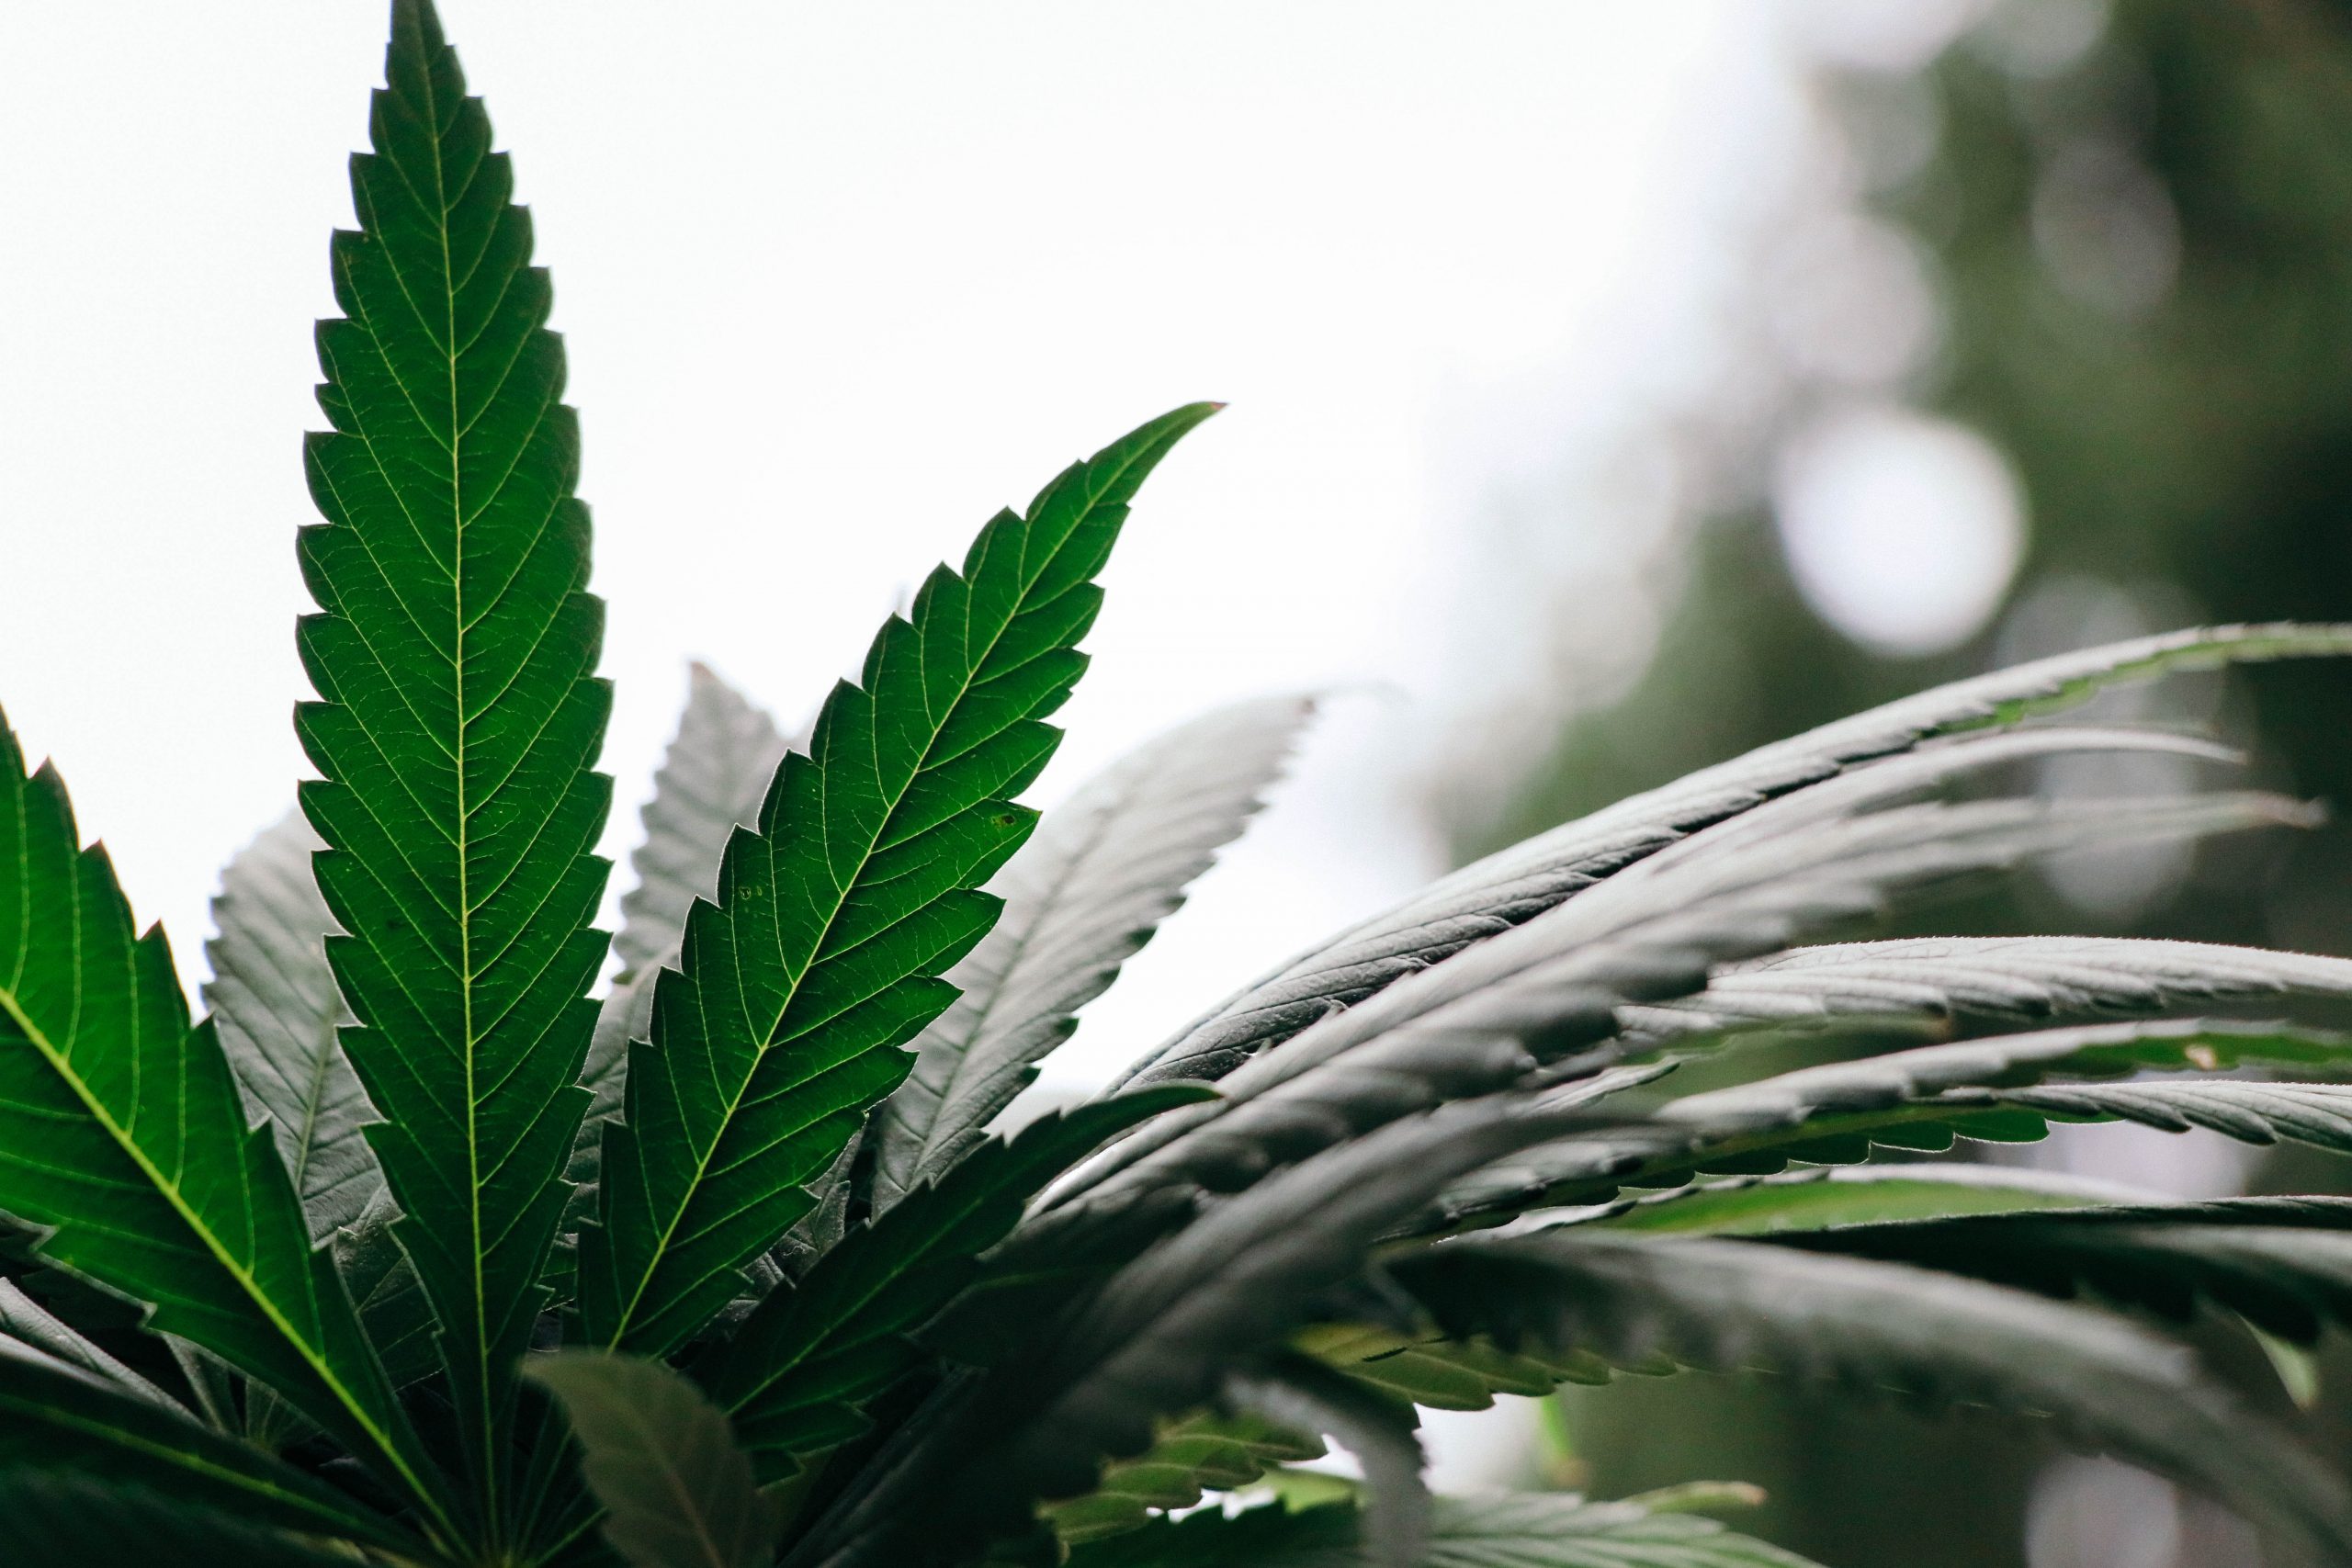 Covering marijuana: Research roundup and 7 tips for journalists - The Journalist's Resource